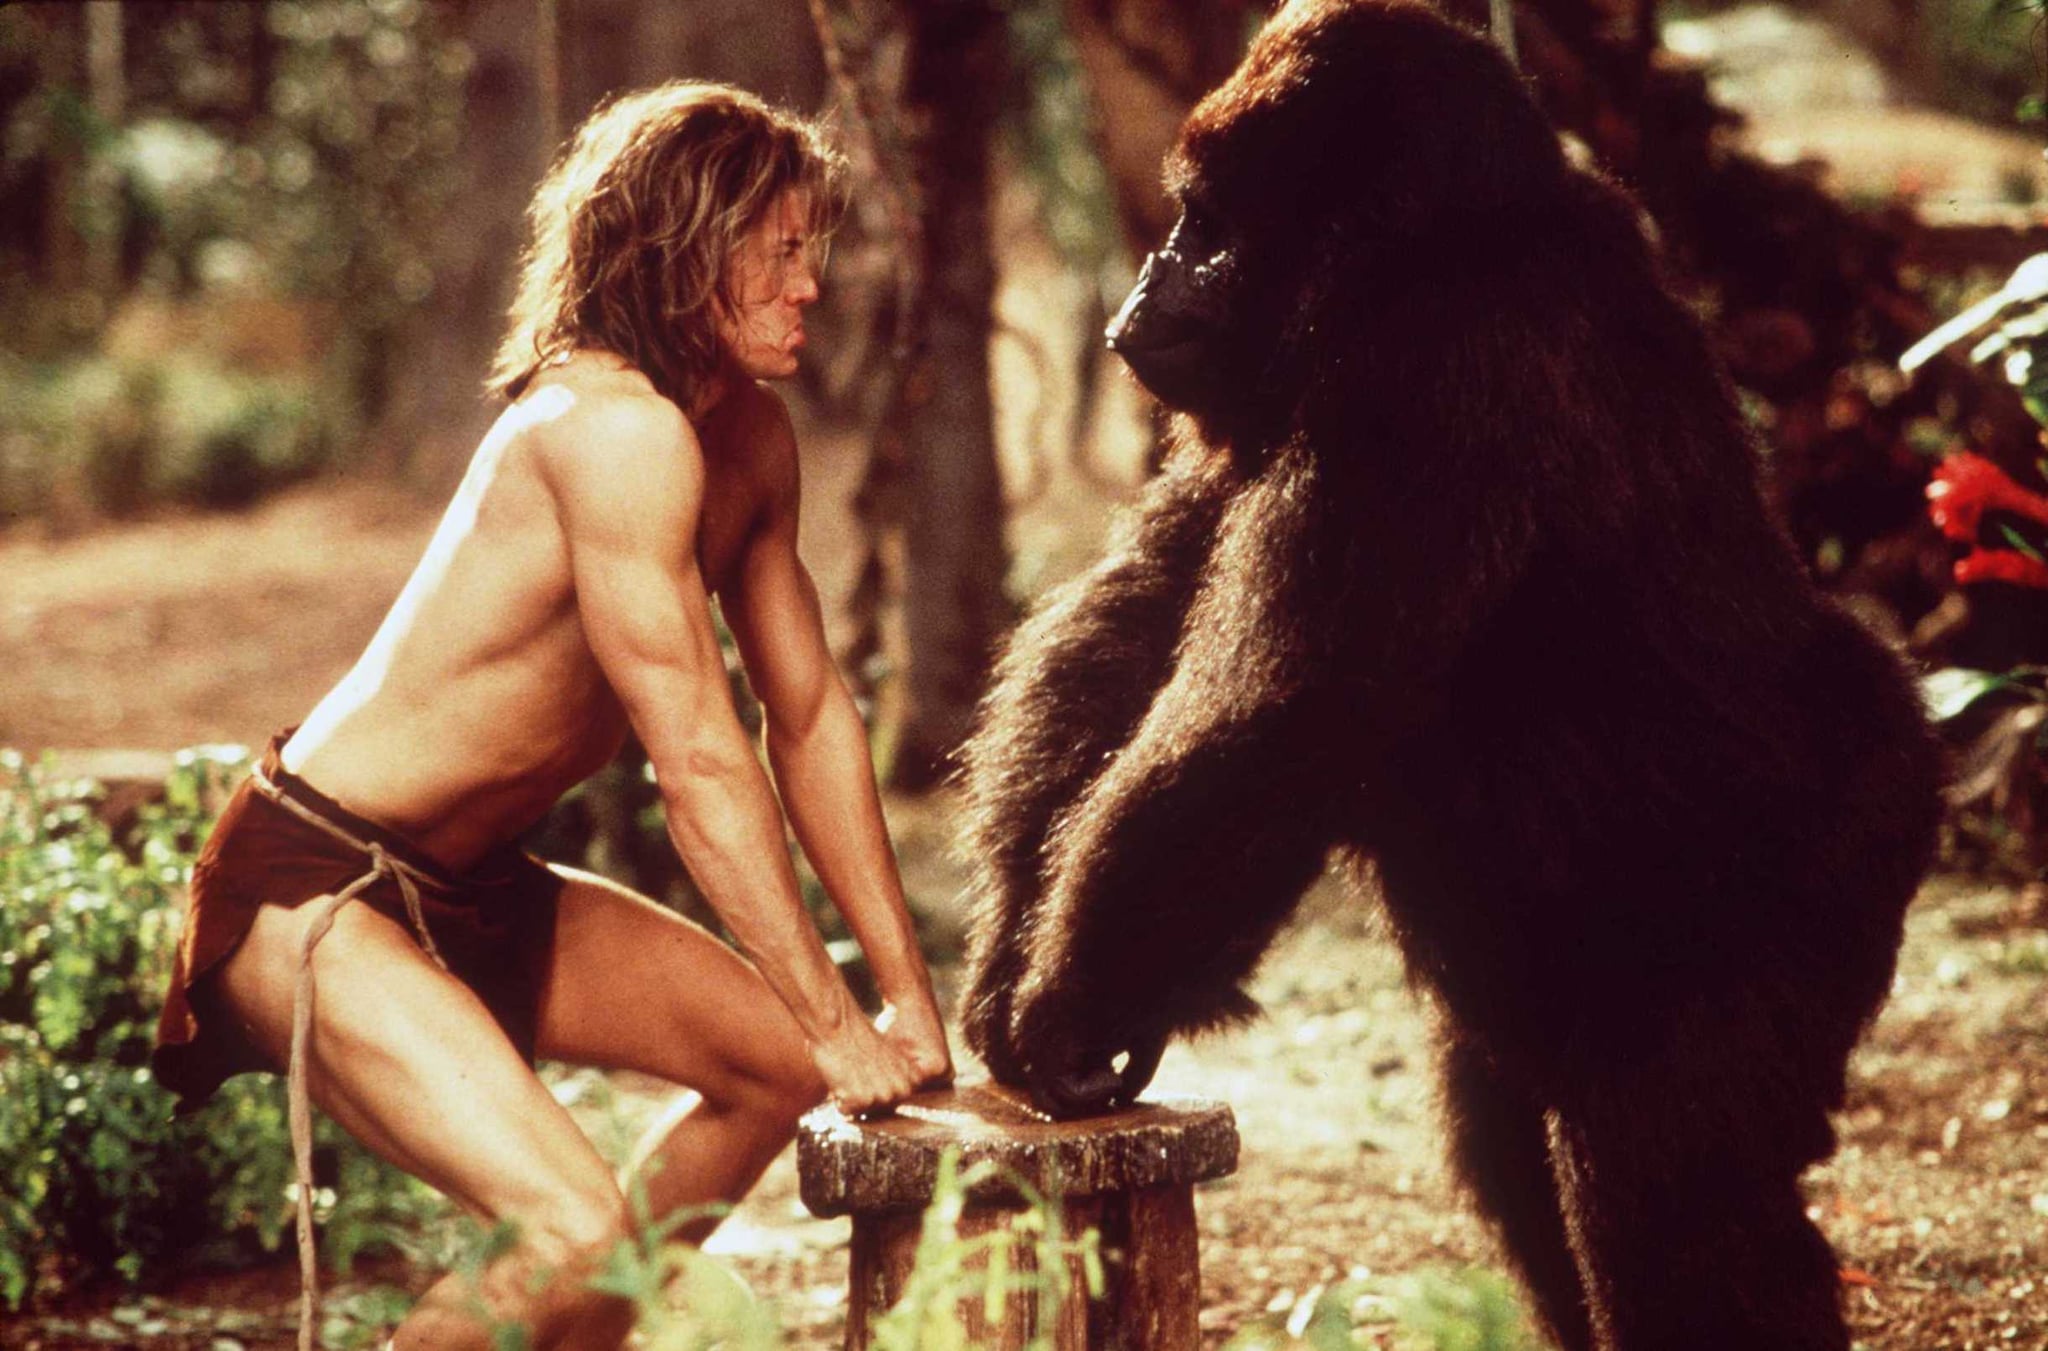 1997 Brendan Fraser stars in the George of the Jungle